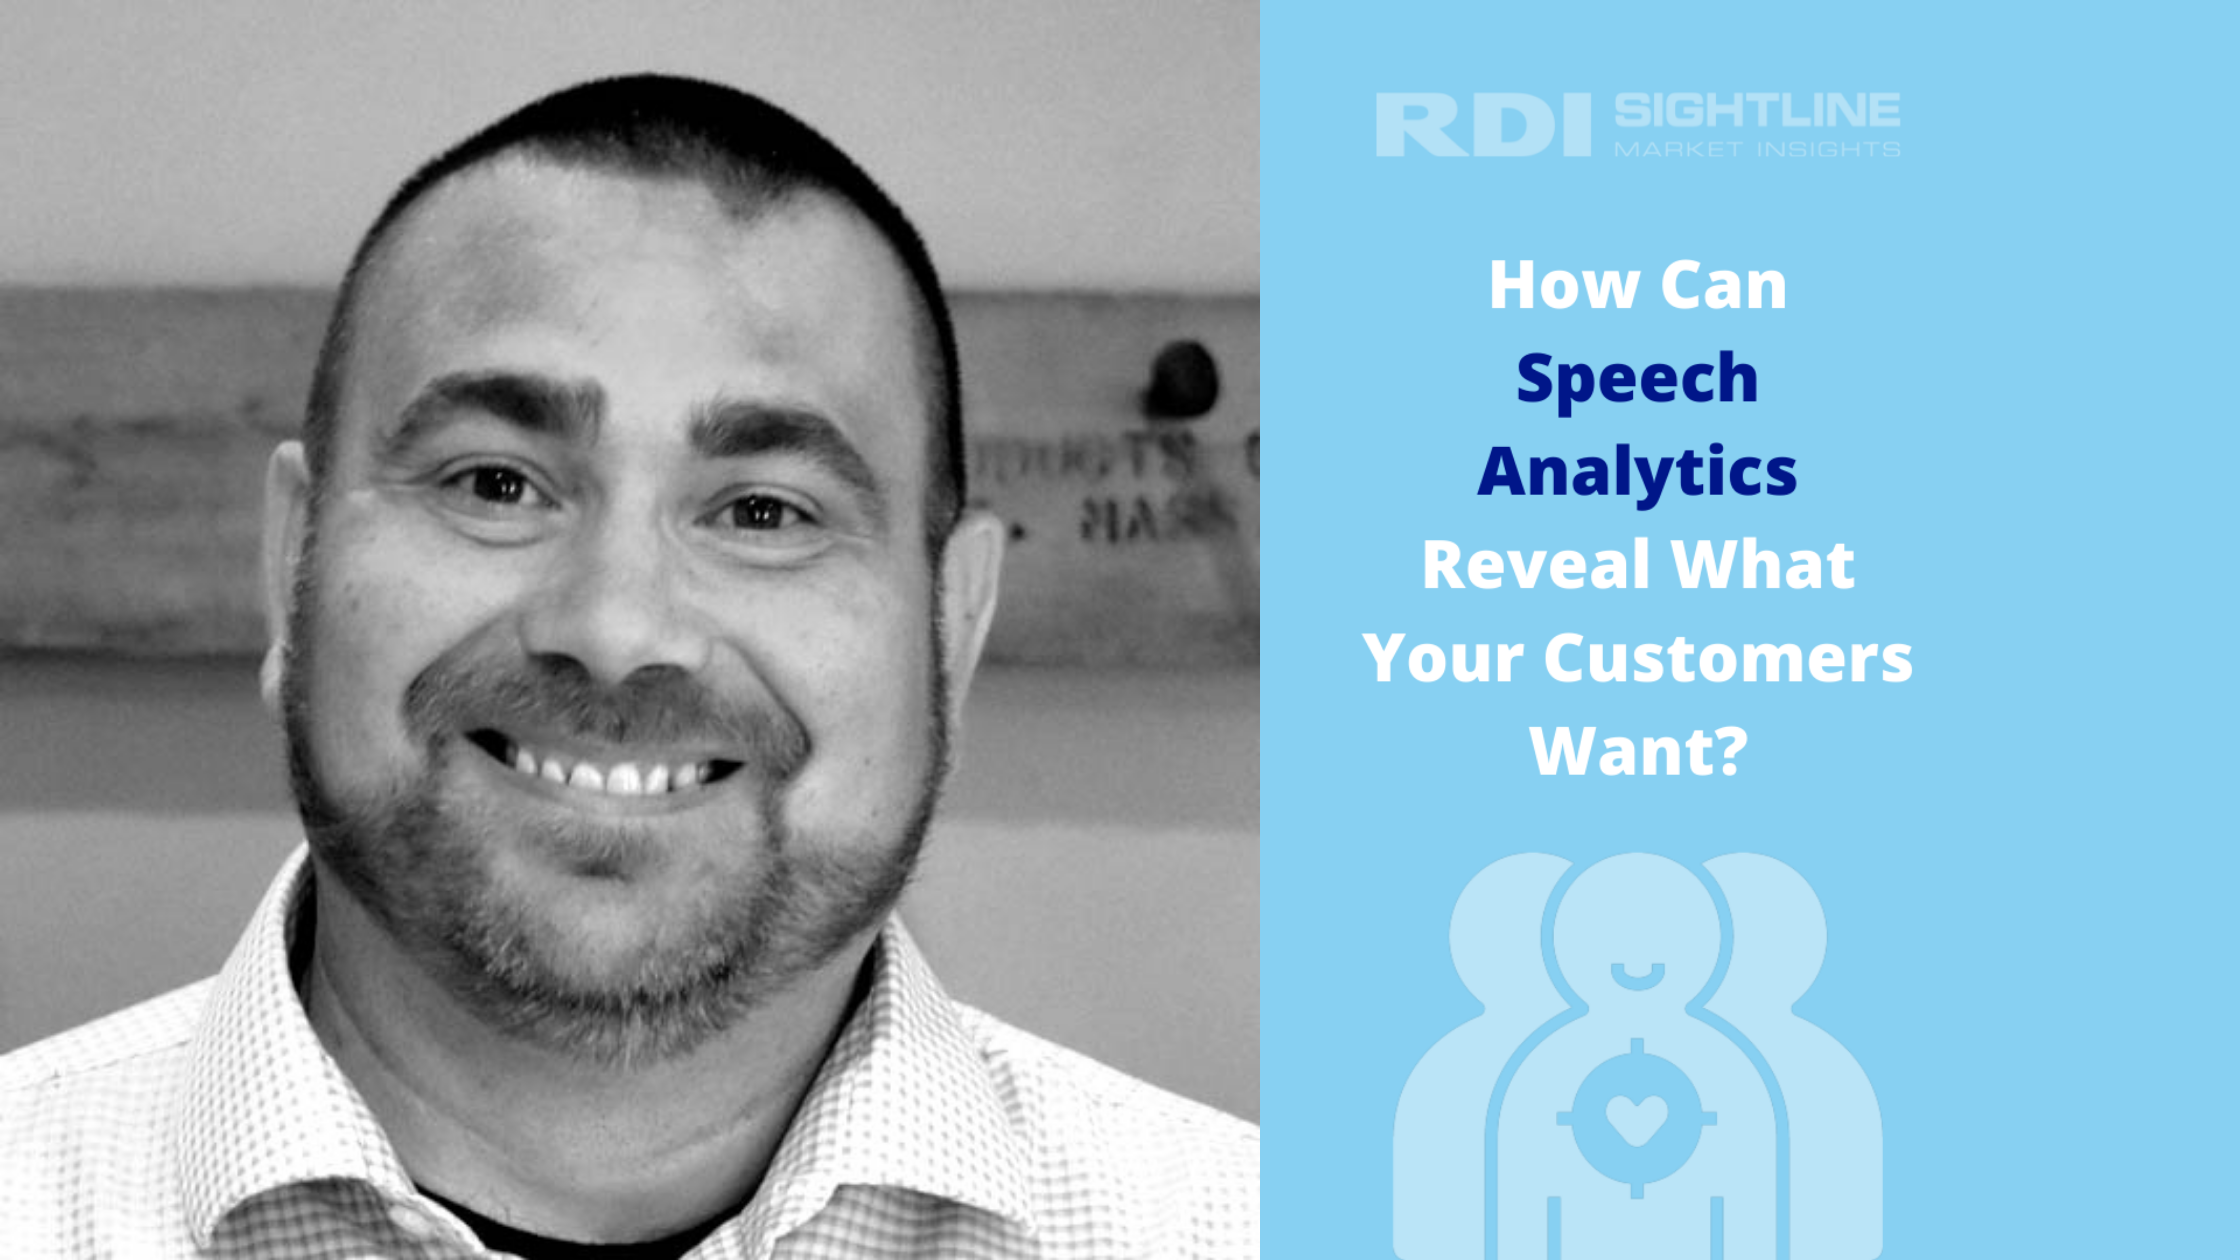 RDI Sightline Blog - How Can Speech Analytics Reveal What Your Customers Want